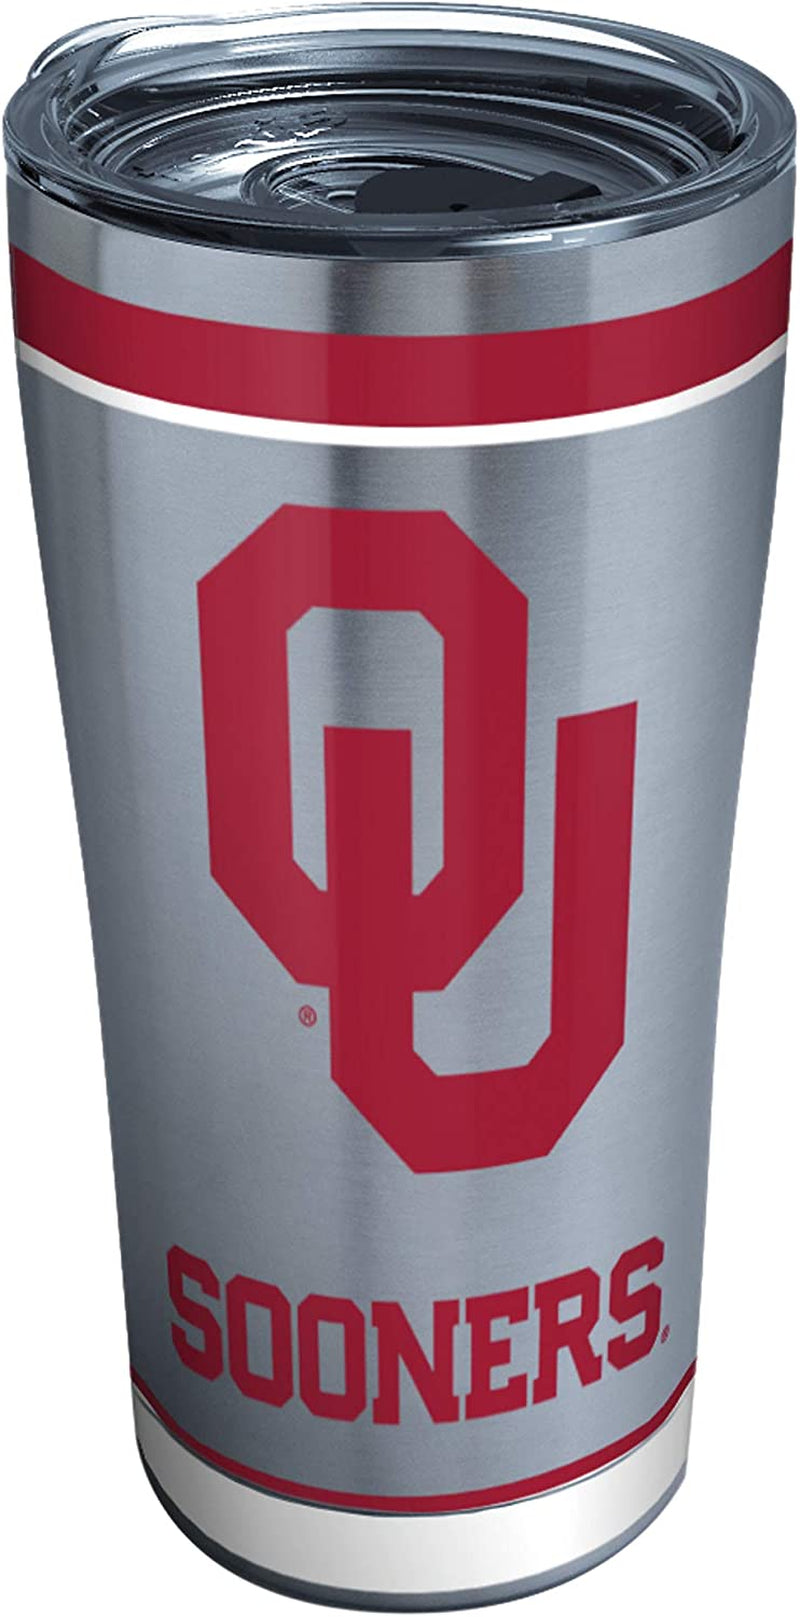 Tervis Triple Walled University of Oklahoma Sooners Insulated Tumbler Cup Keeps Drinks Cold & Hot, 20Oz - Stainless Steel, Tradition